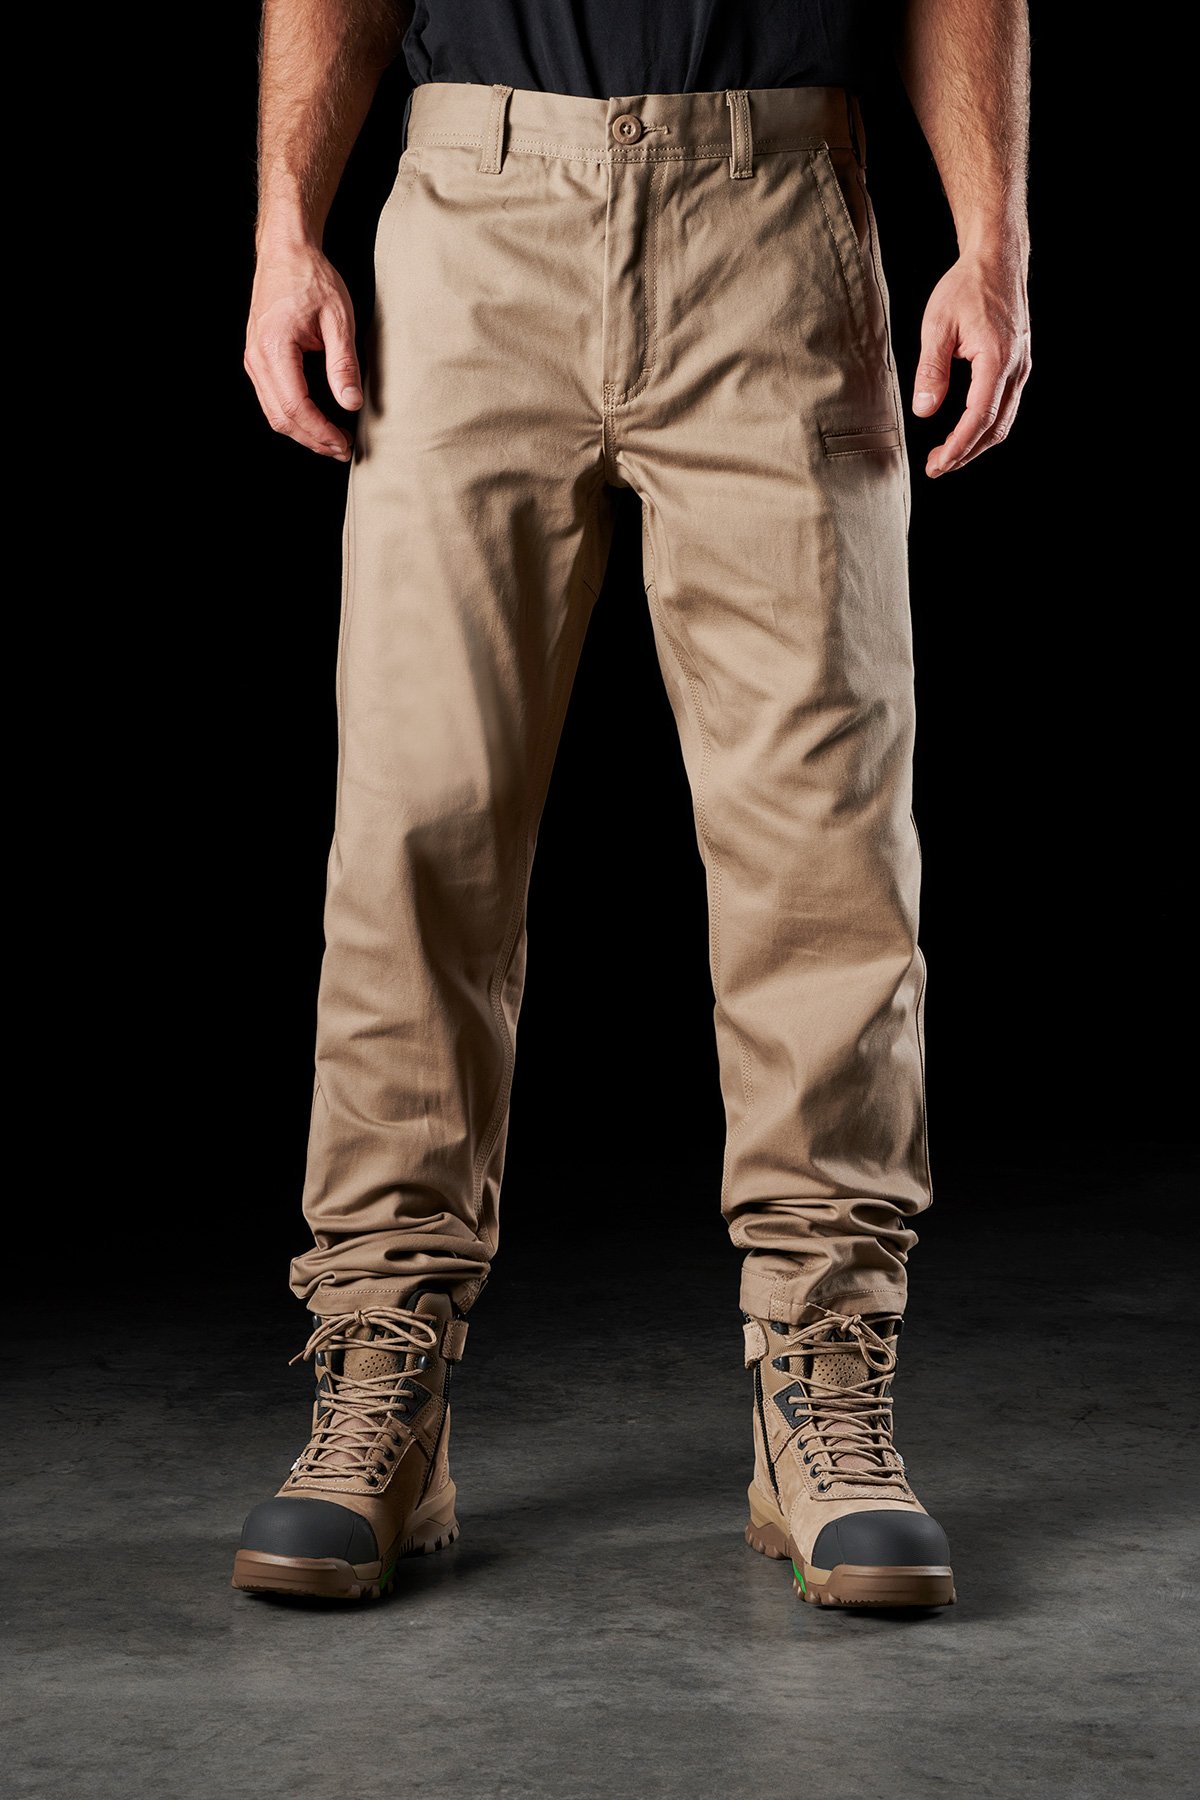 fxd utility work pant - WorkGearSelect Totally Workwear, Work Clothes ...